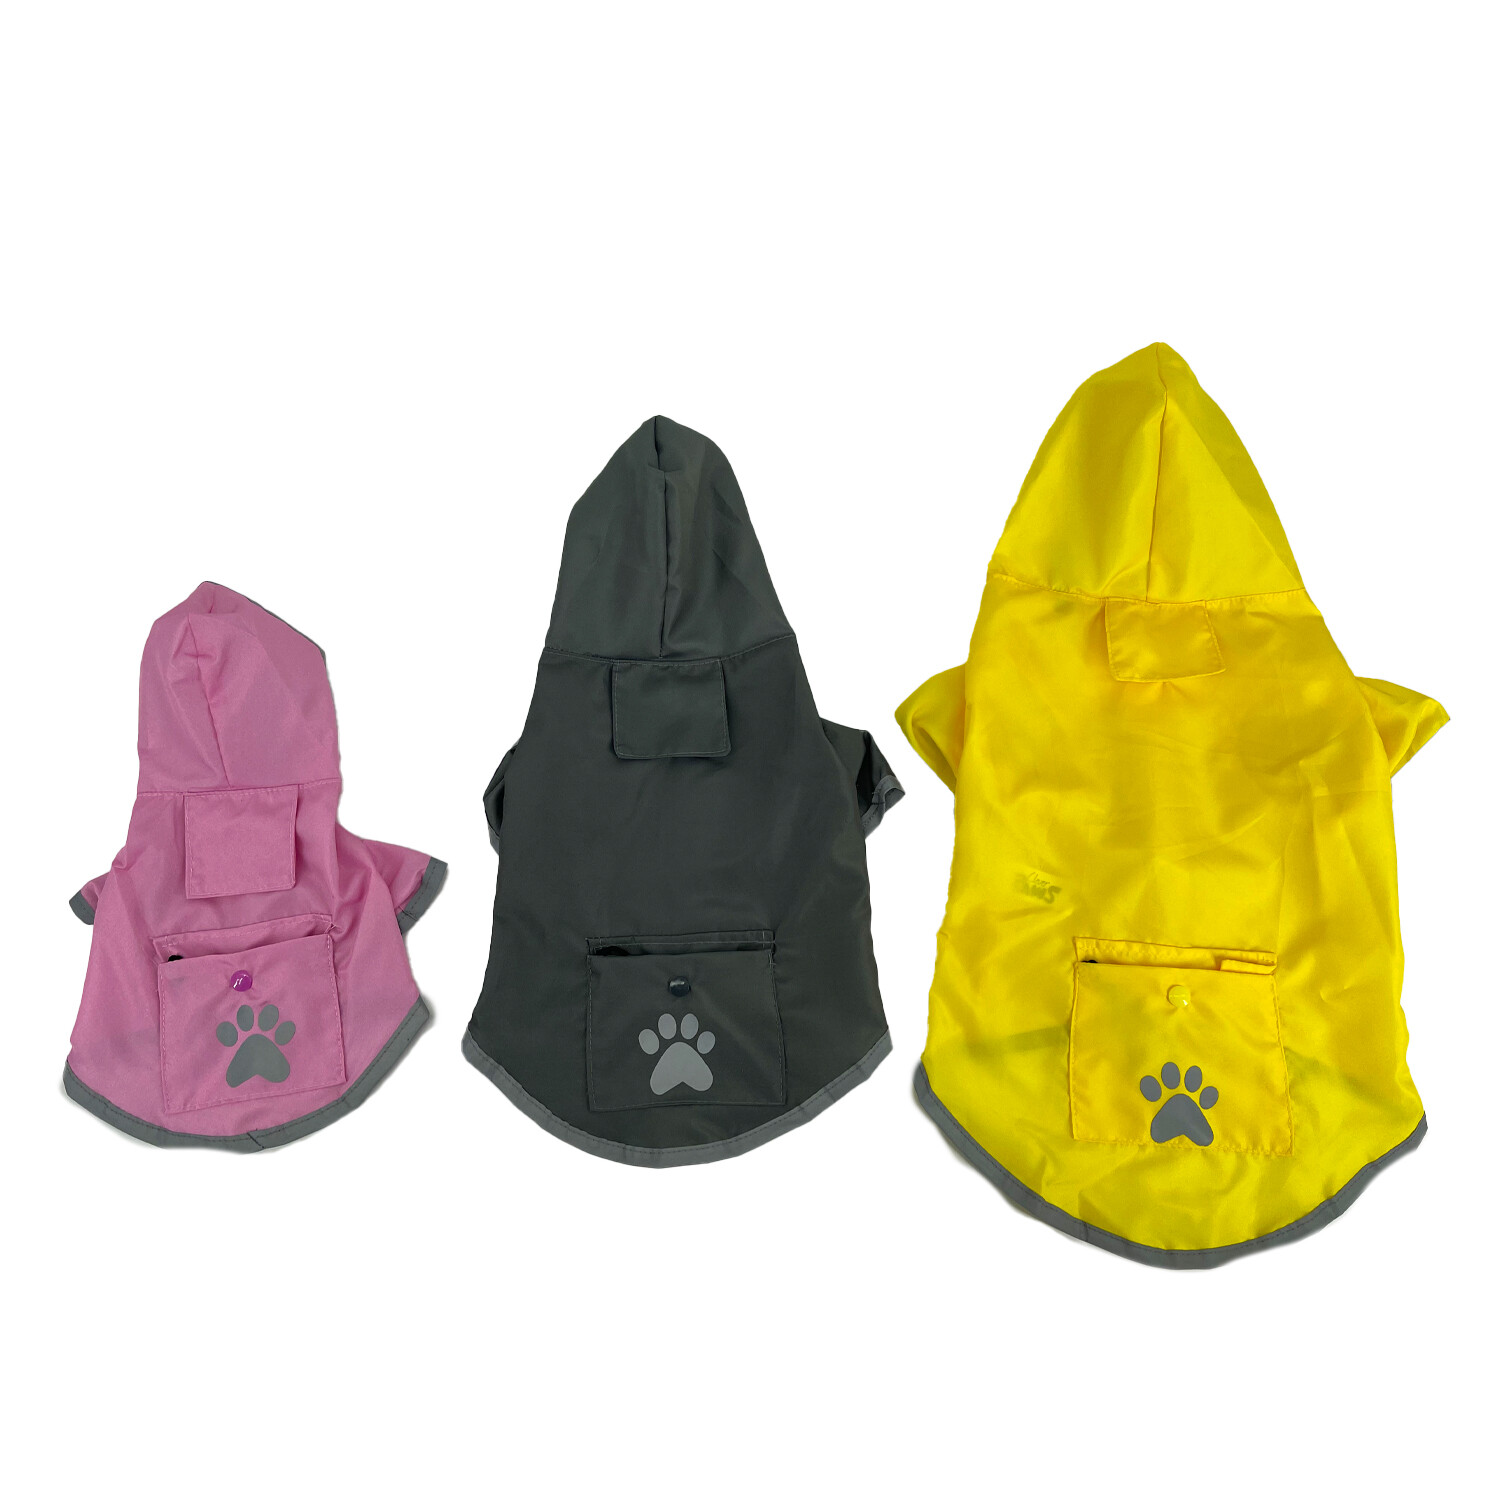 Single Clever Paws Pet Packaway Raincoat 30cm in Assorted styles Image